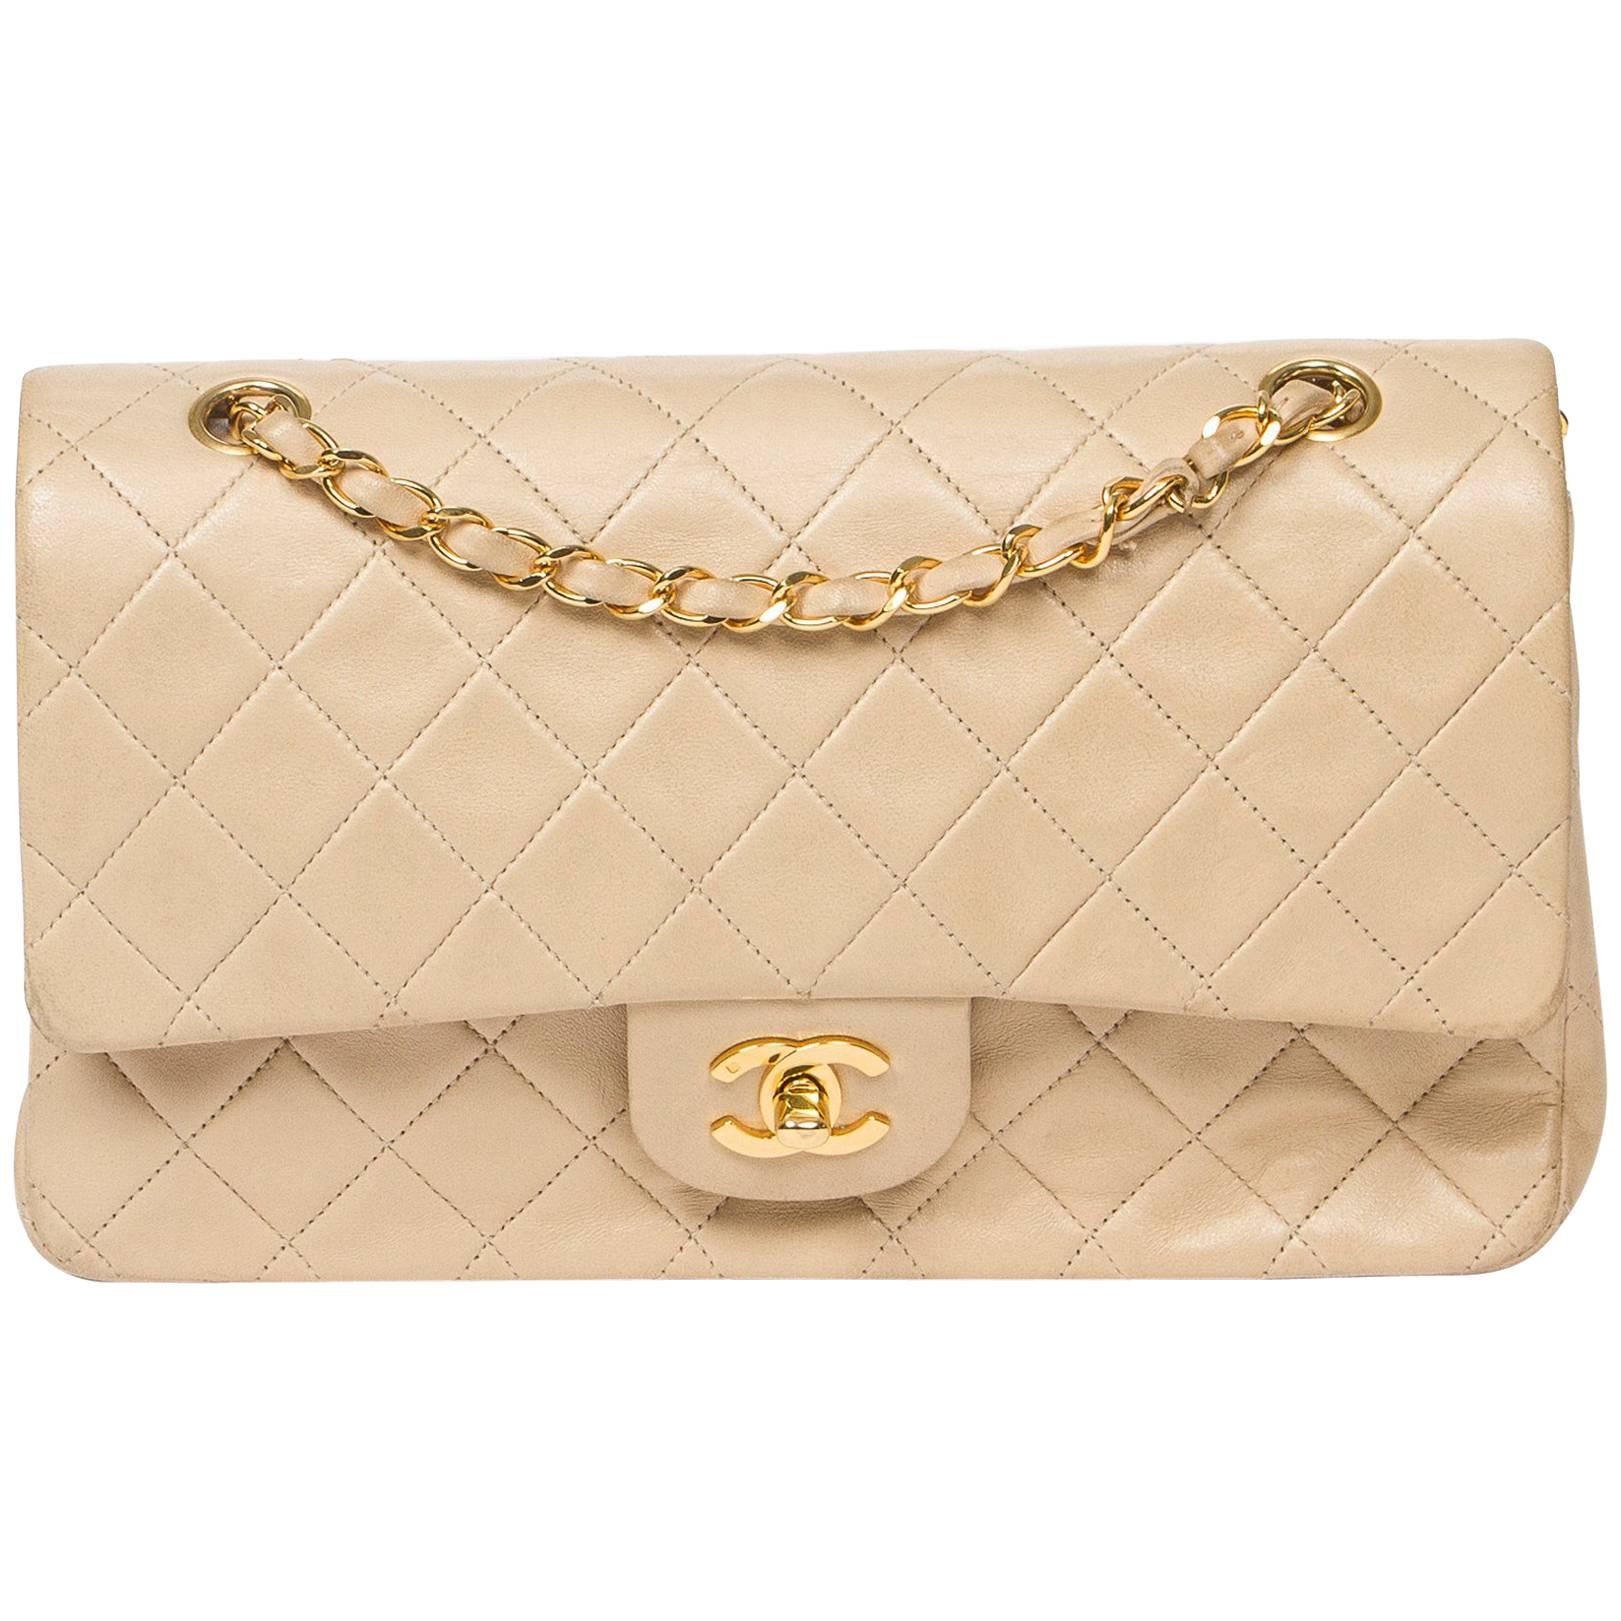 Chanel Classic Double Flap 26 in beige quilted calf leather